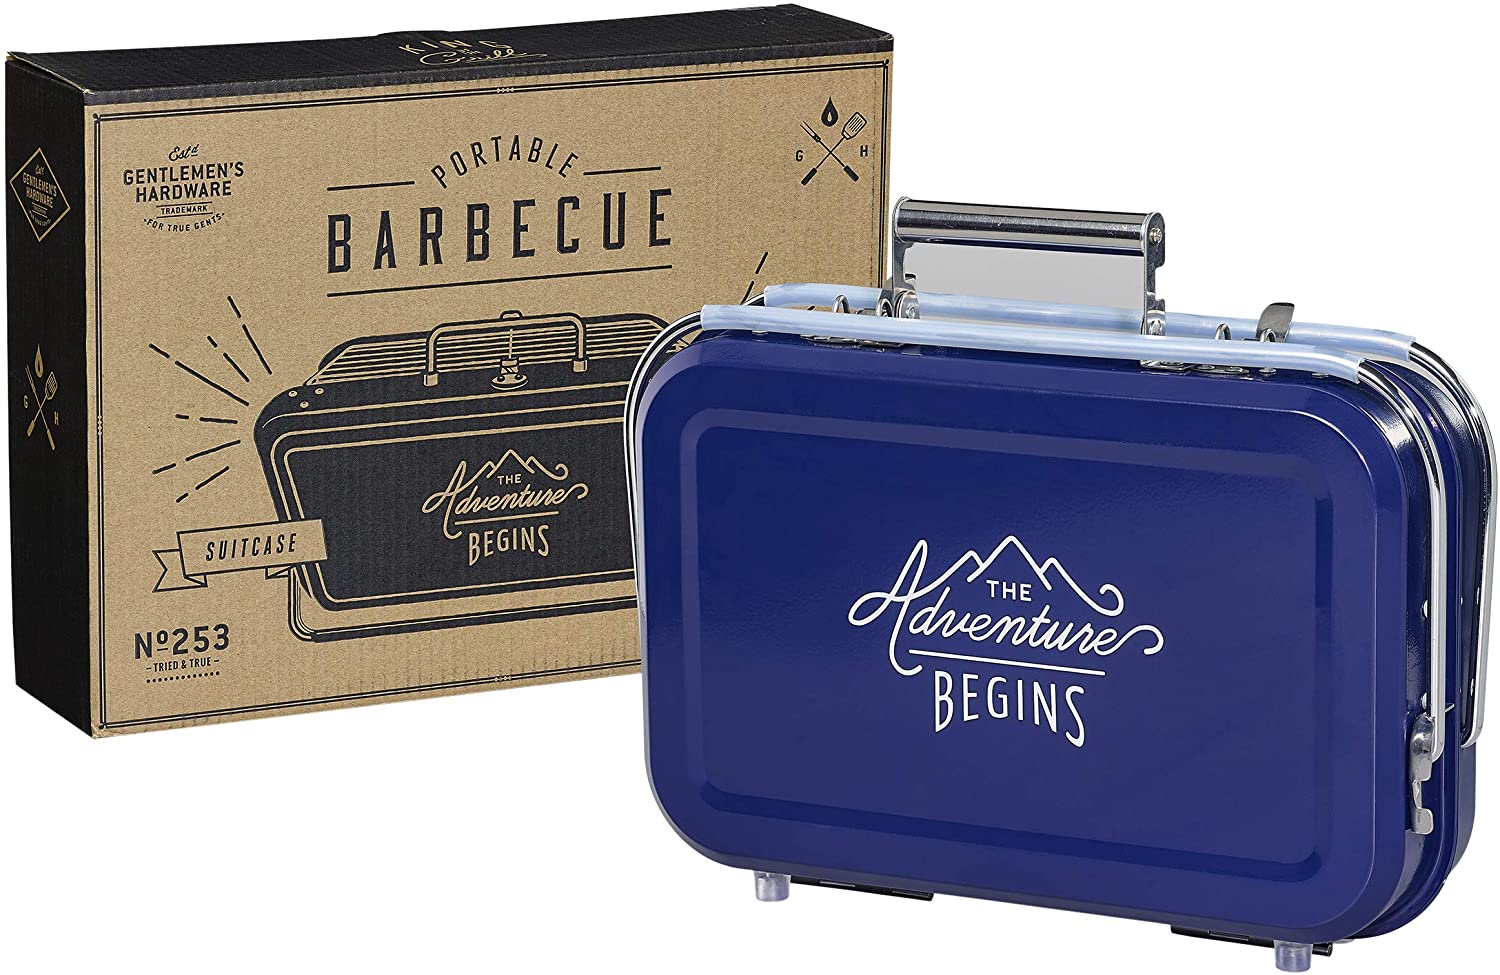 Gentlemen's Hardware Portable Stainless Steel BBQ Suitcase Style Barbecue